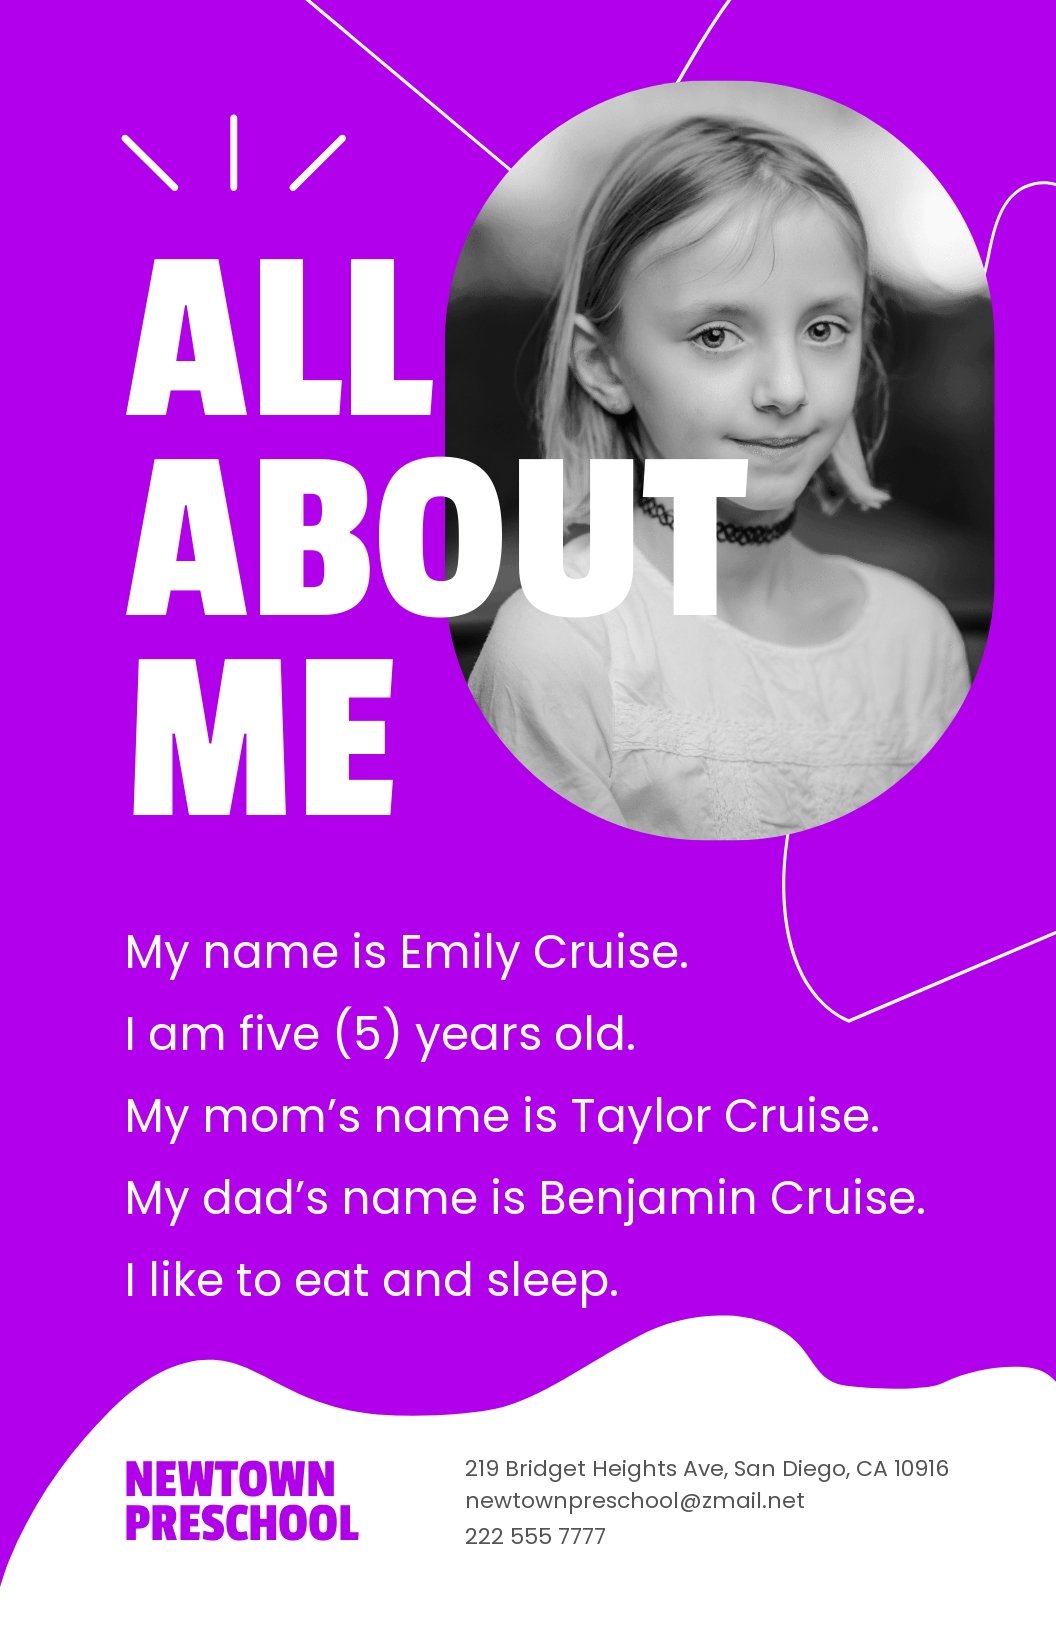 All About Me Poster Ideas For Preschoolers